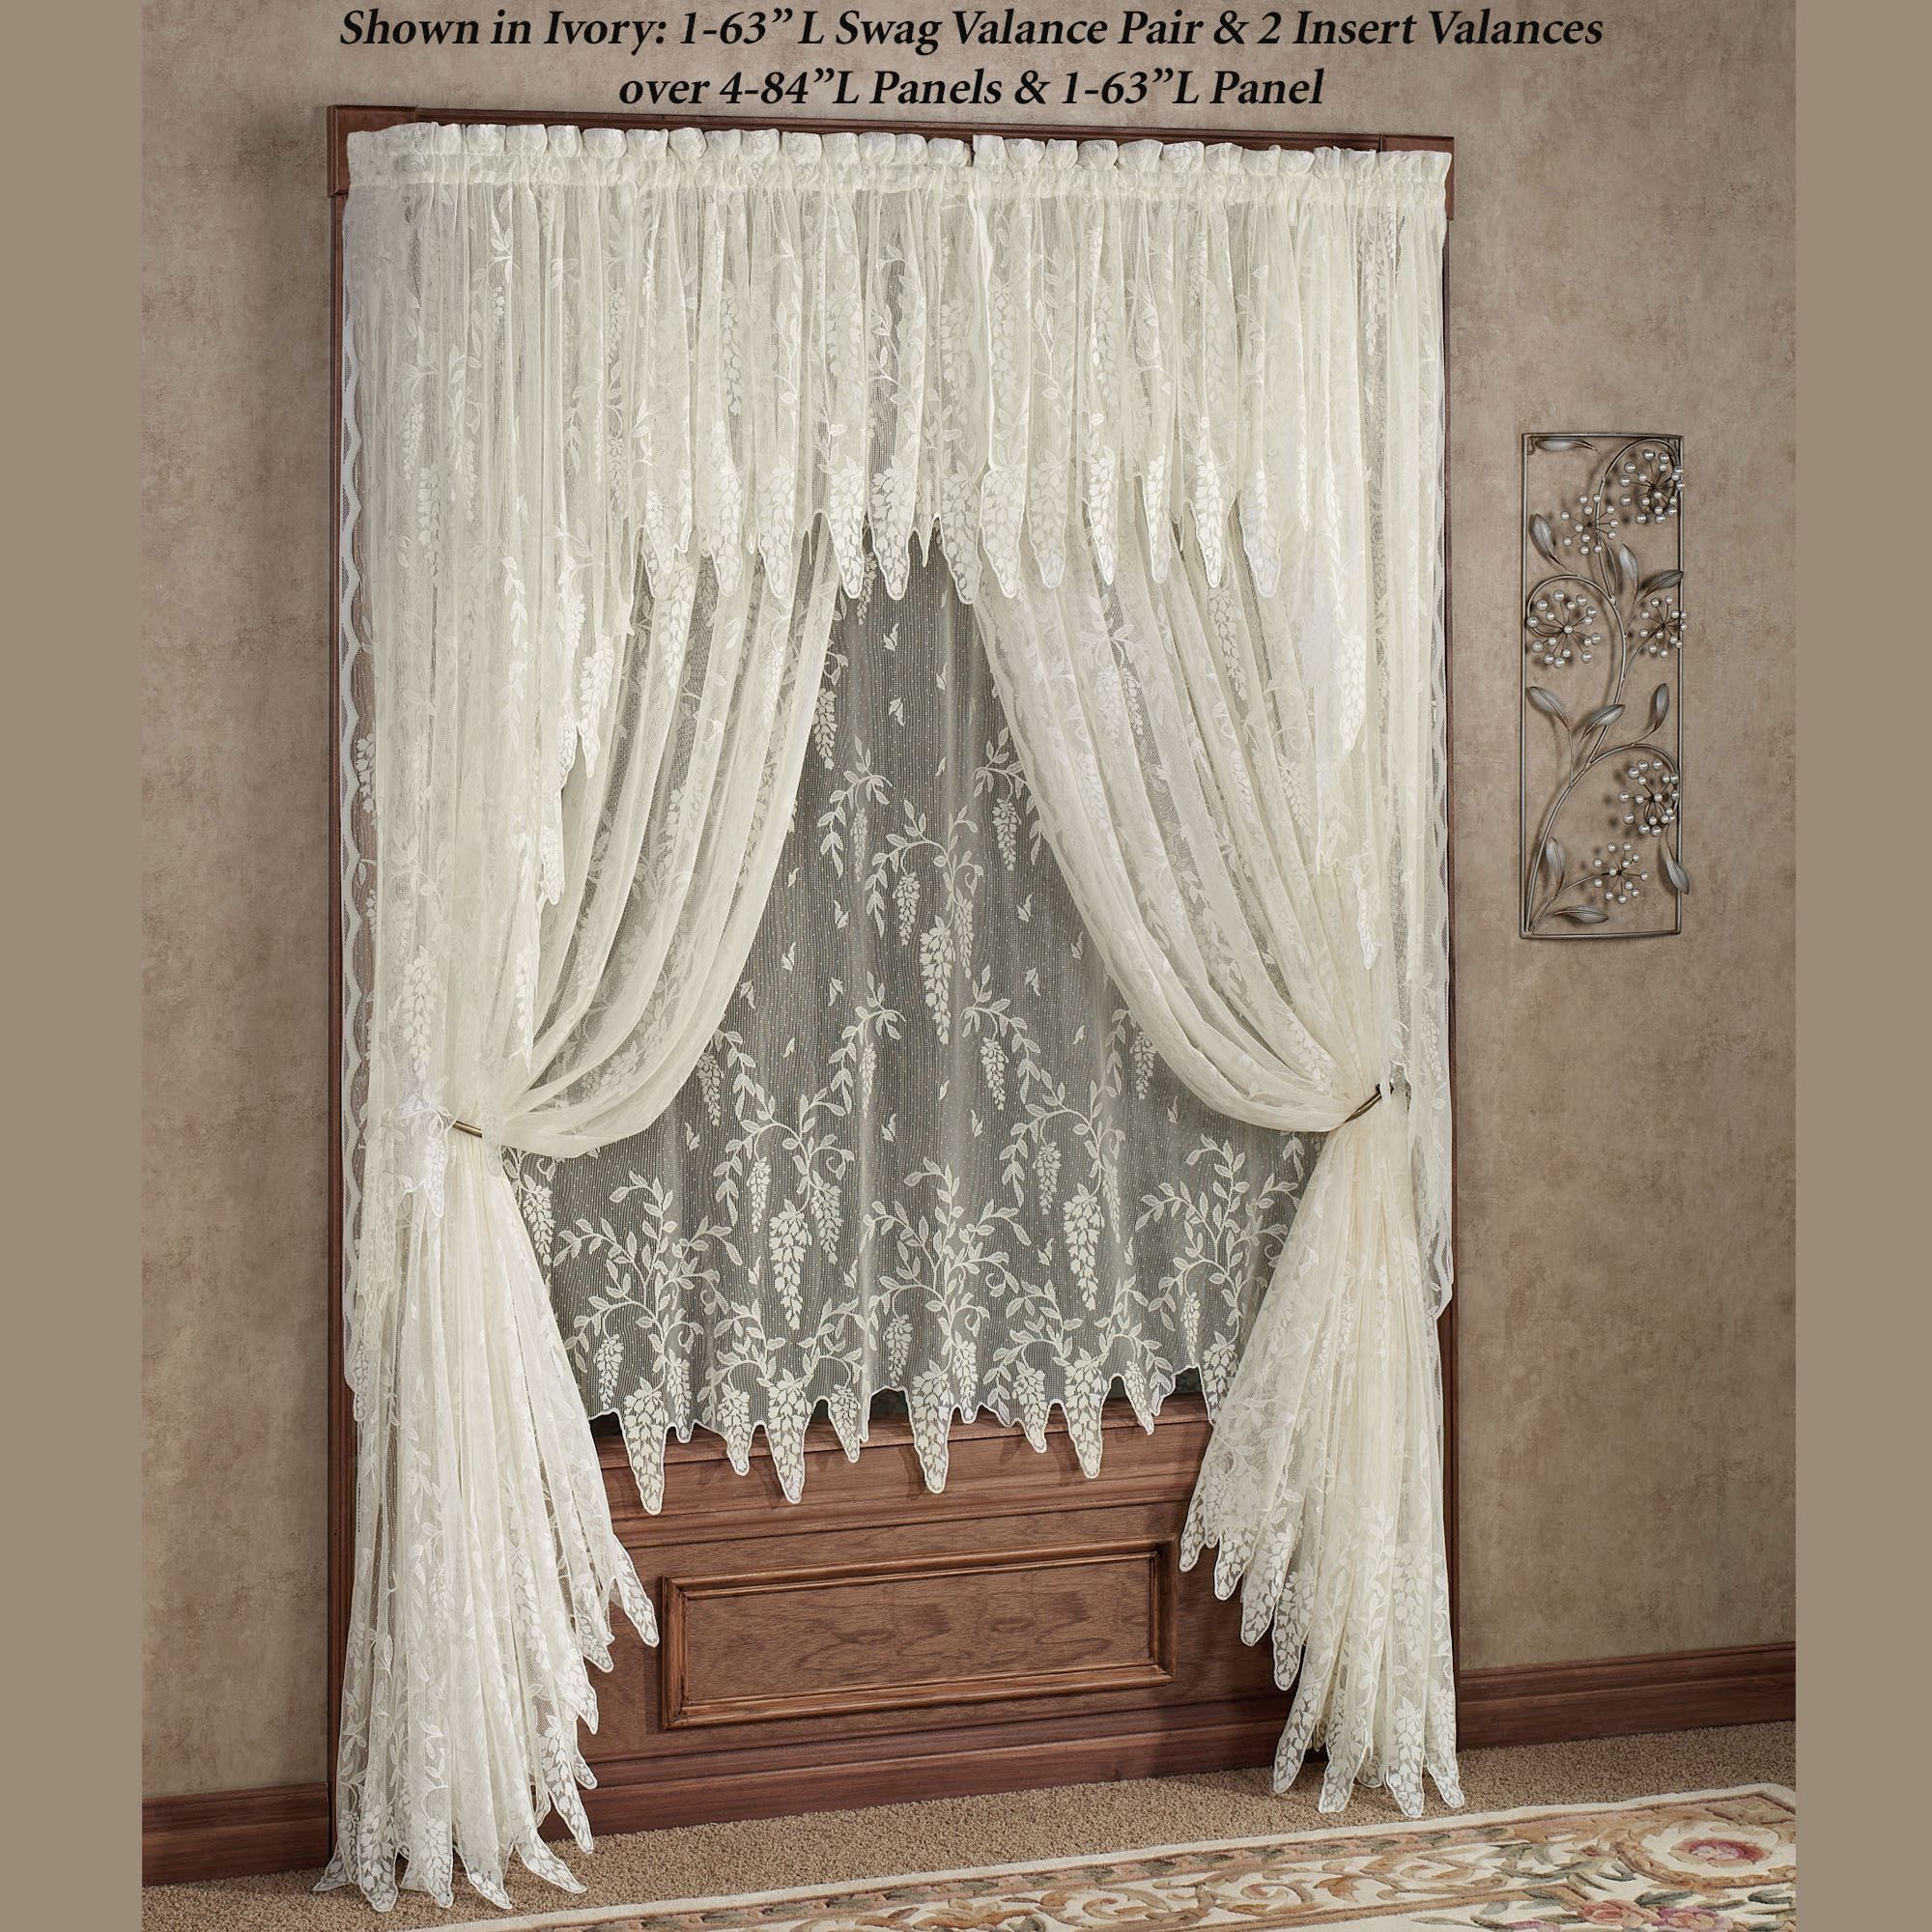 Wisteria Arbor Lace Window Treatments For Lace Curtains (View 2 of 25)